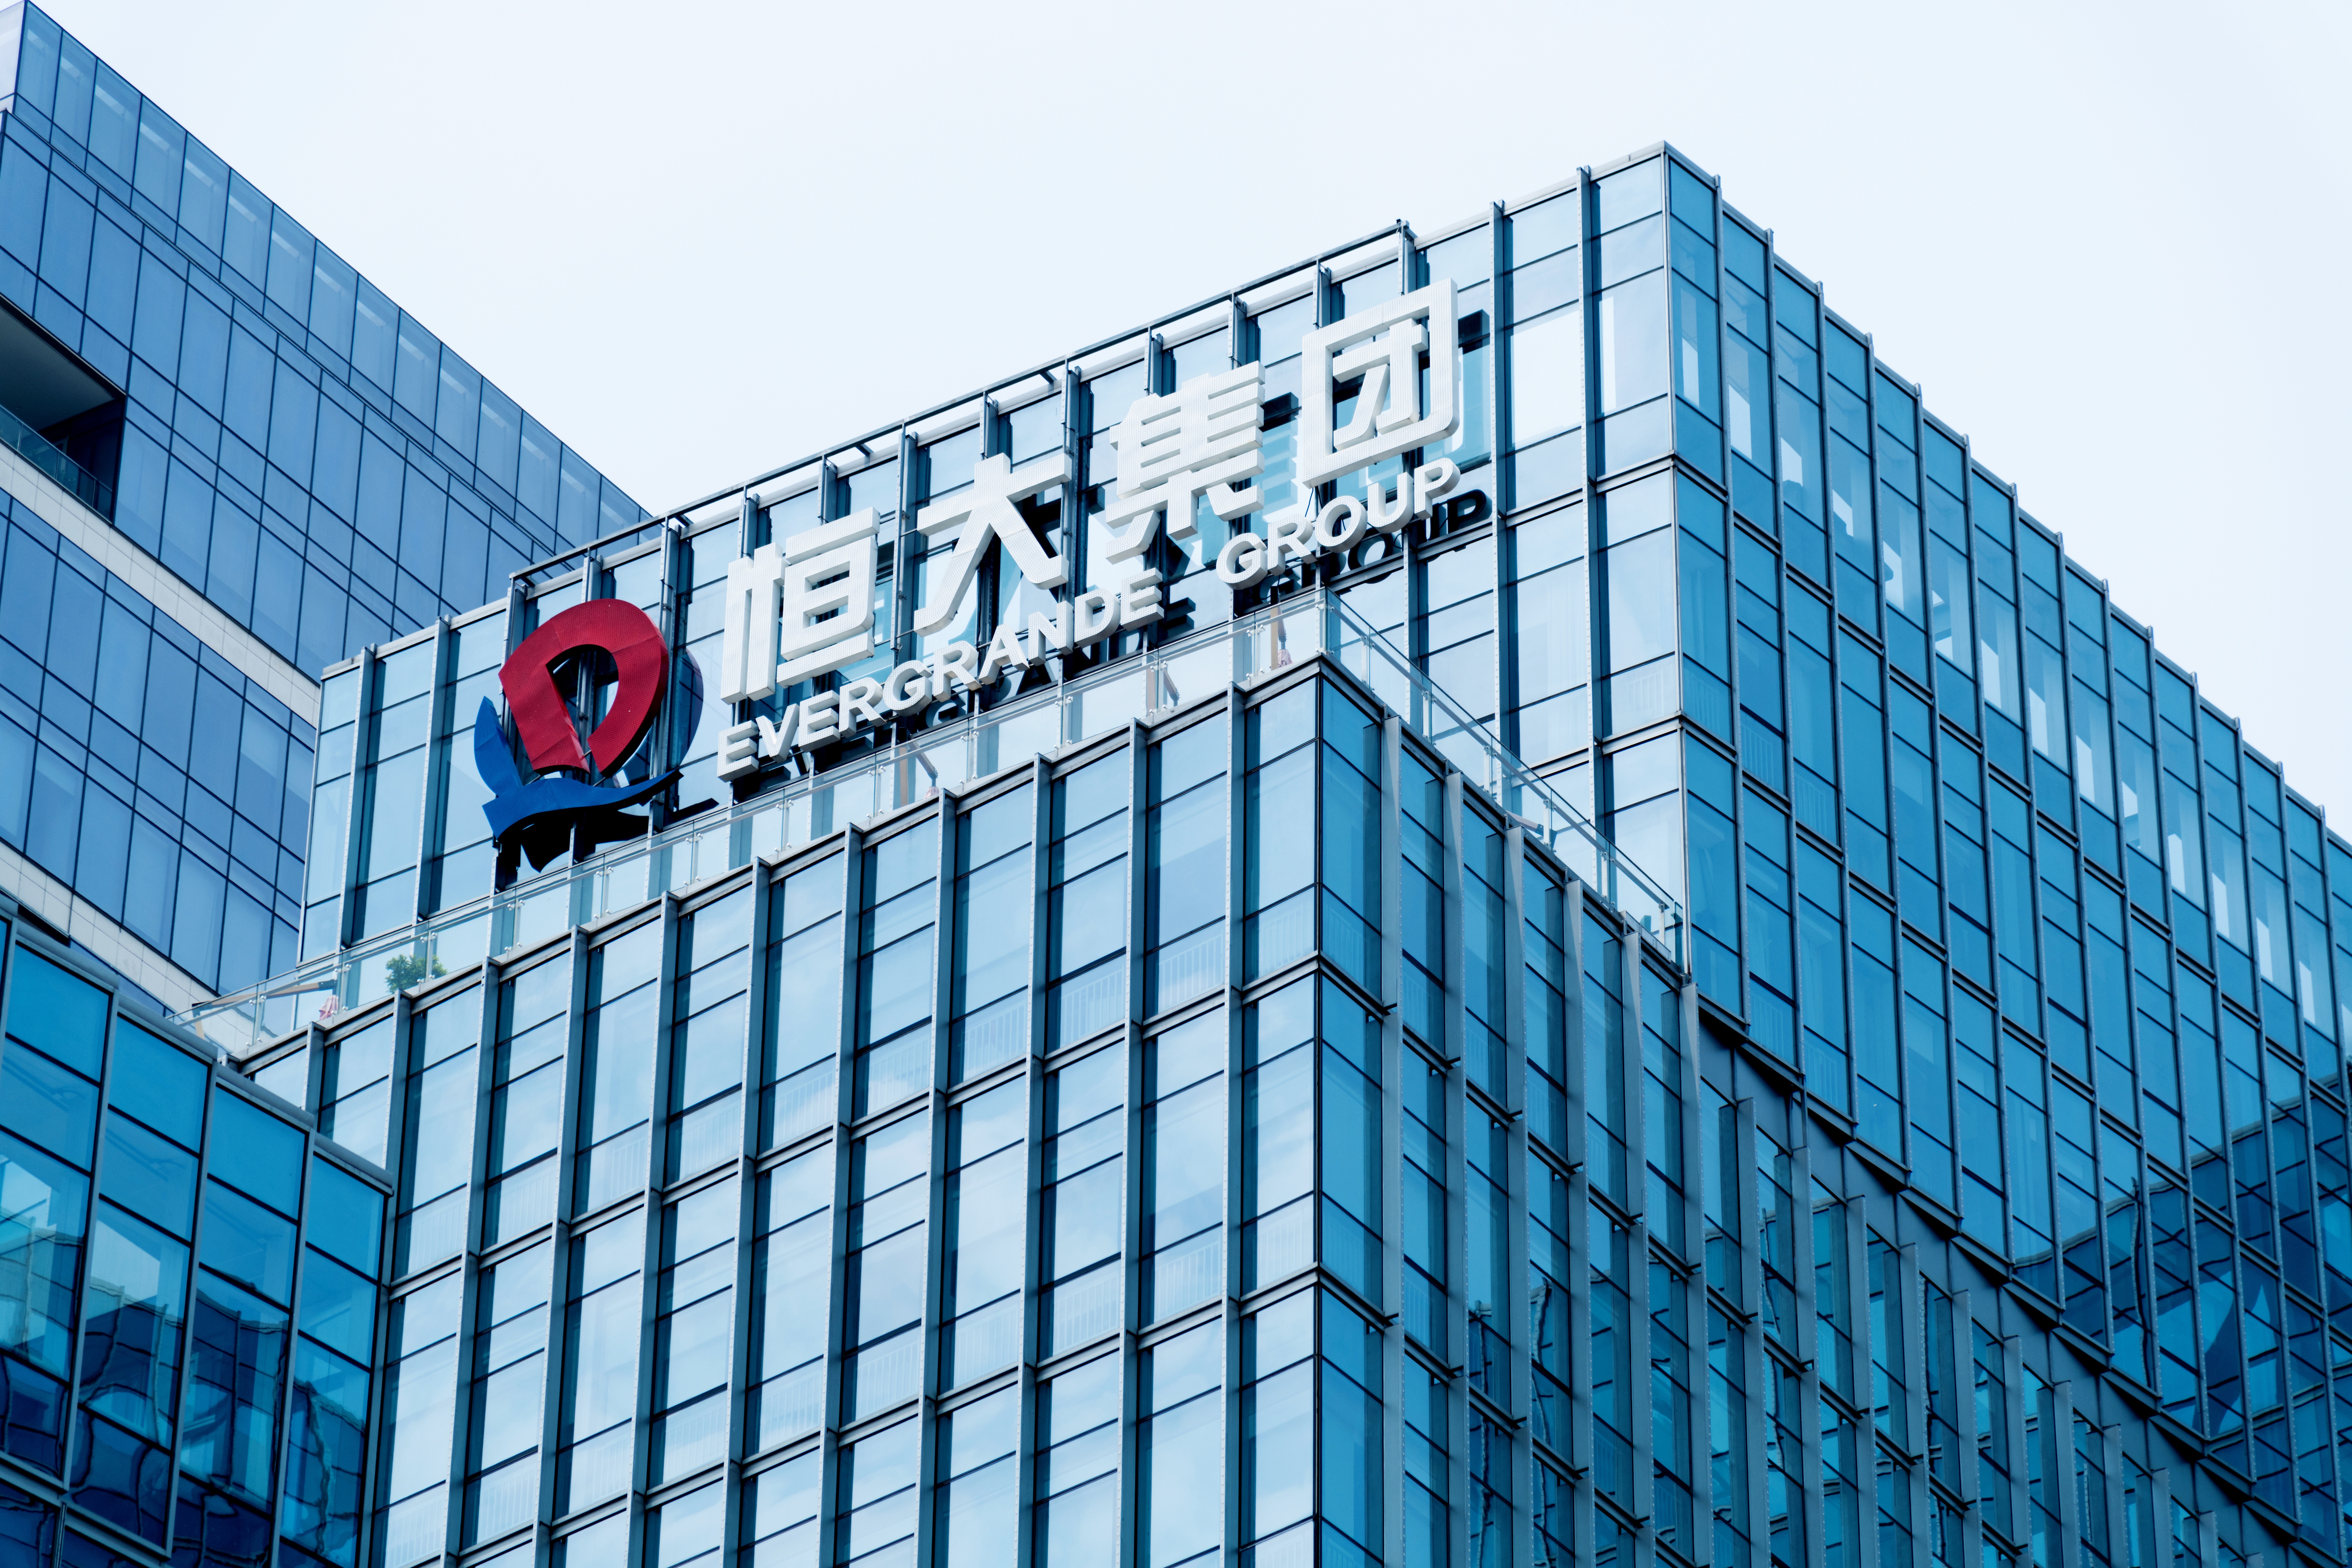 A Hong Kong court in January this year ordered Chinese real estate giant Evergrande to be wound up following months of speculation. Photo: Shutterstock